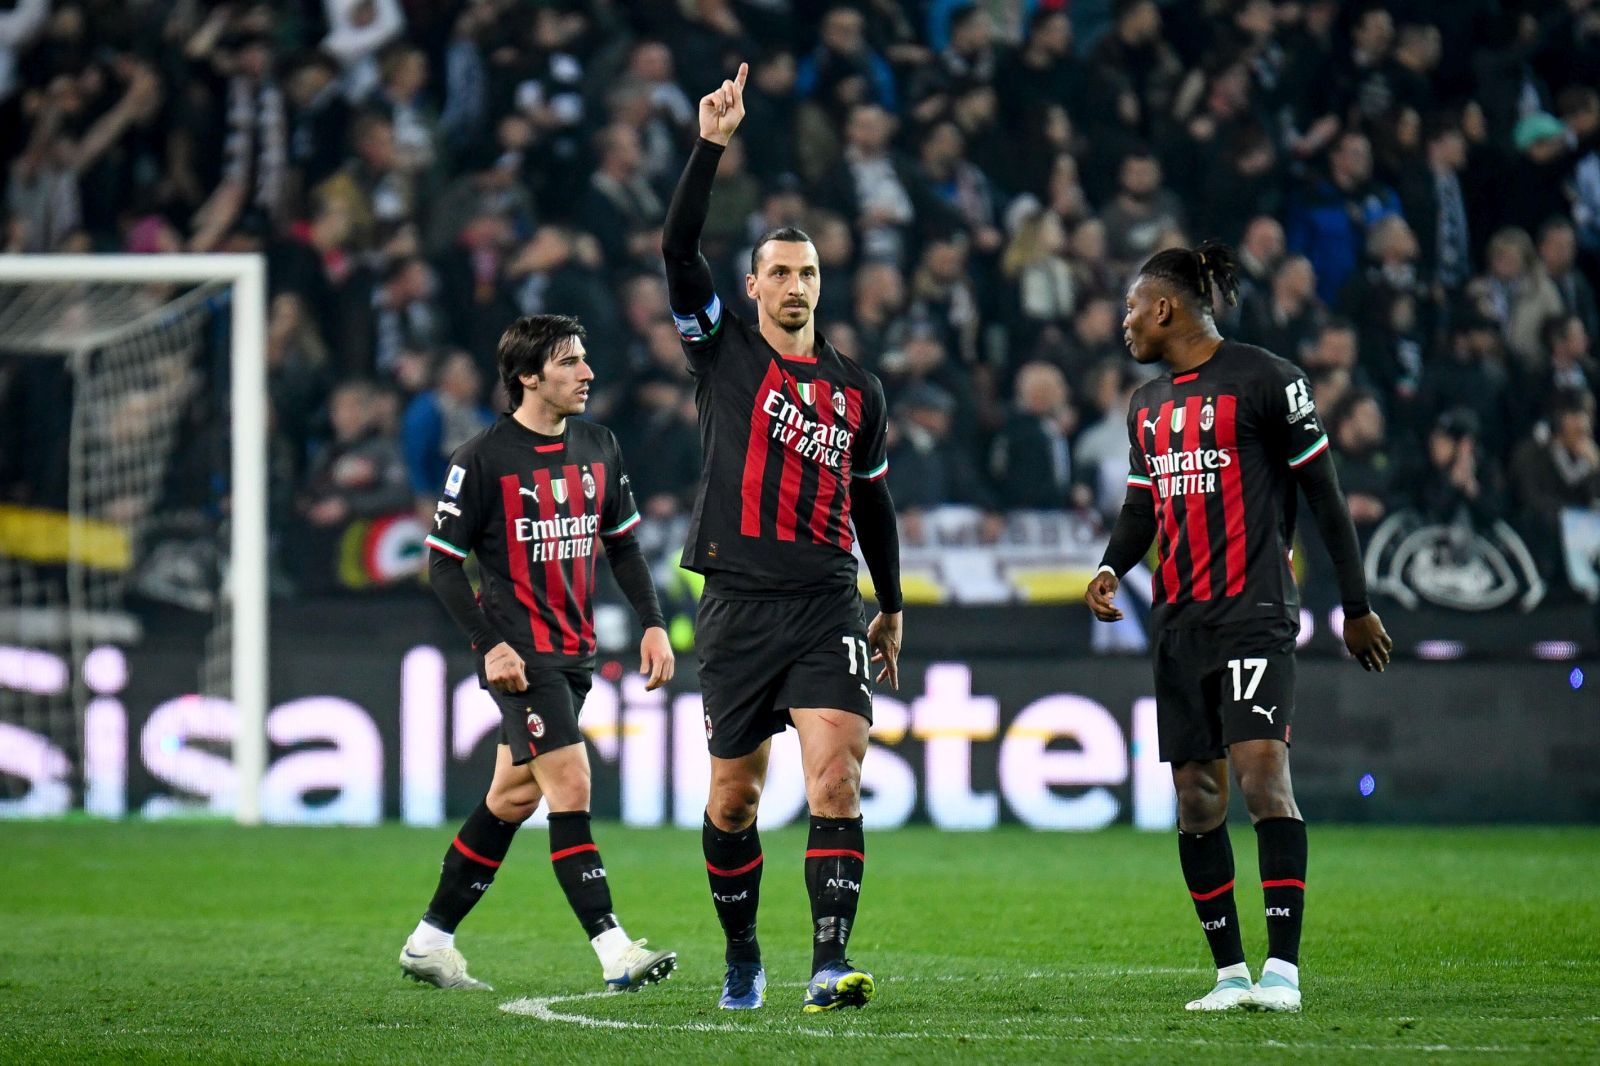 epa10530979 Milan's Zlatan Ibrahimovic celebrates after scoring the 1-1 goal during the Italian soccer Serie A soccer match betweem Udinese Calcio and AC Milan, in Udine, Italy, 18 March 2023.  EPA/ETTORE GRIFFONI